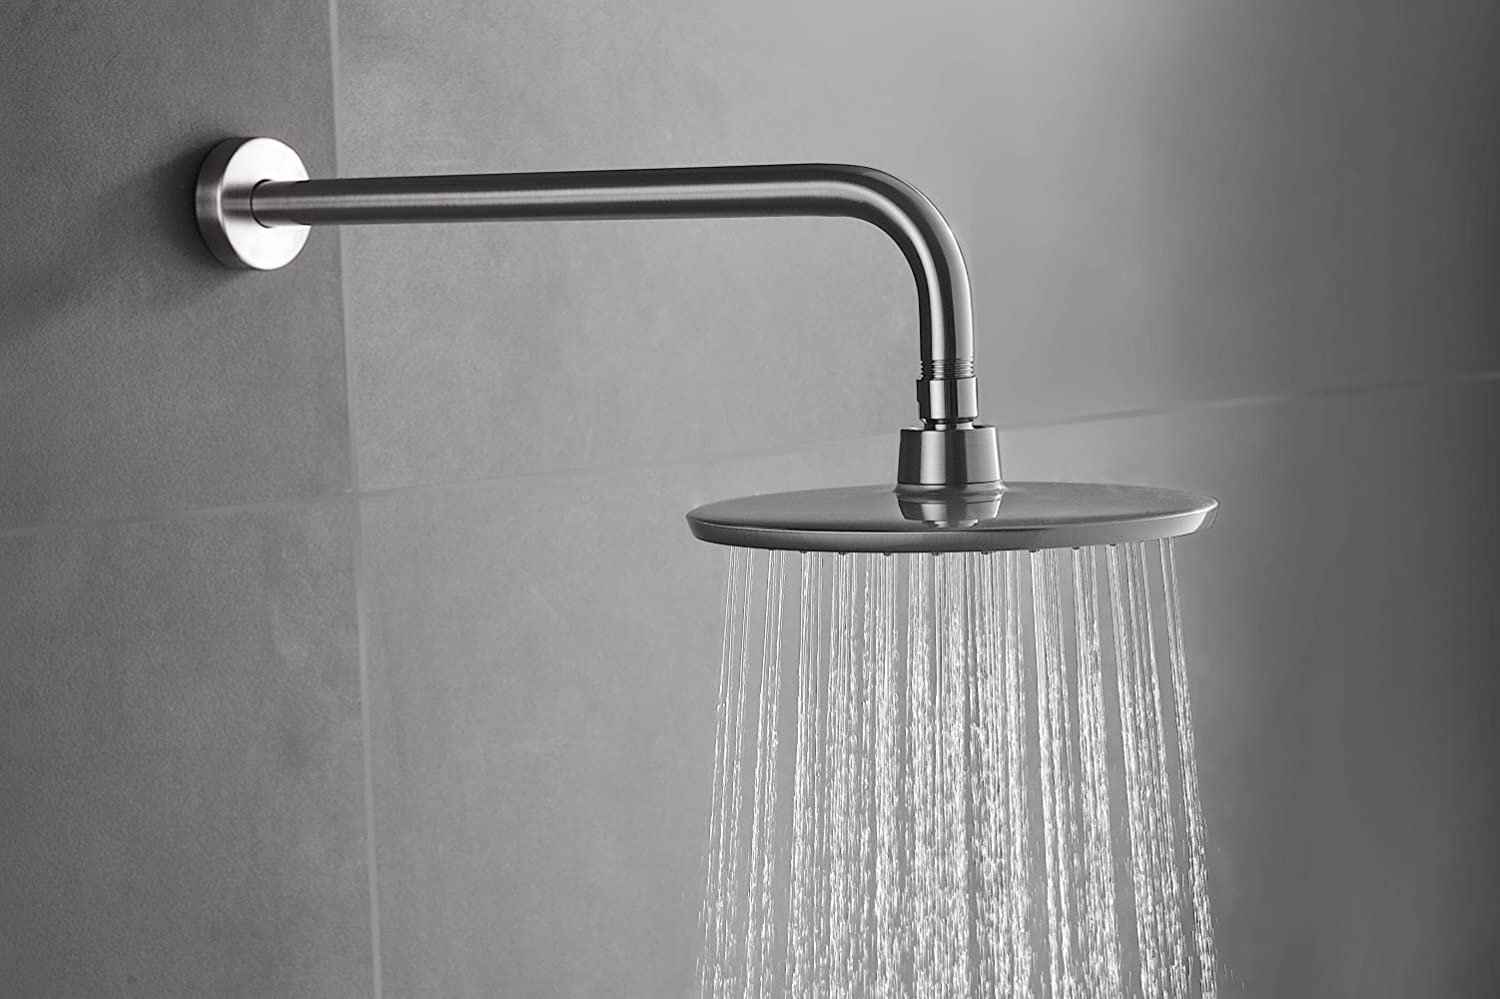 How to Choose a Perfect Shower Arm?